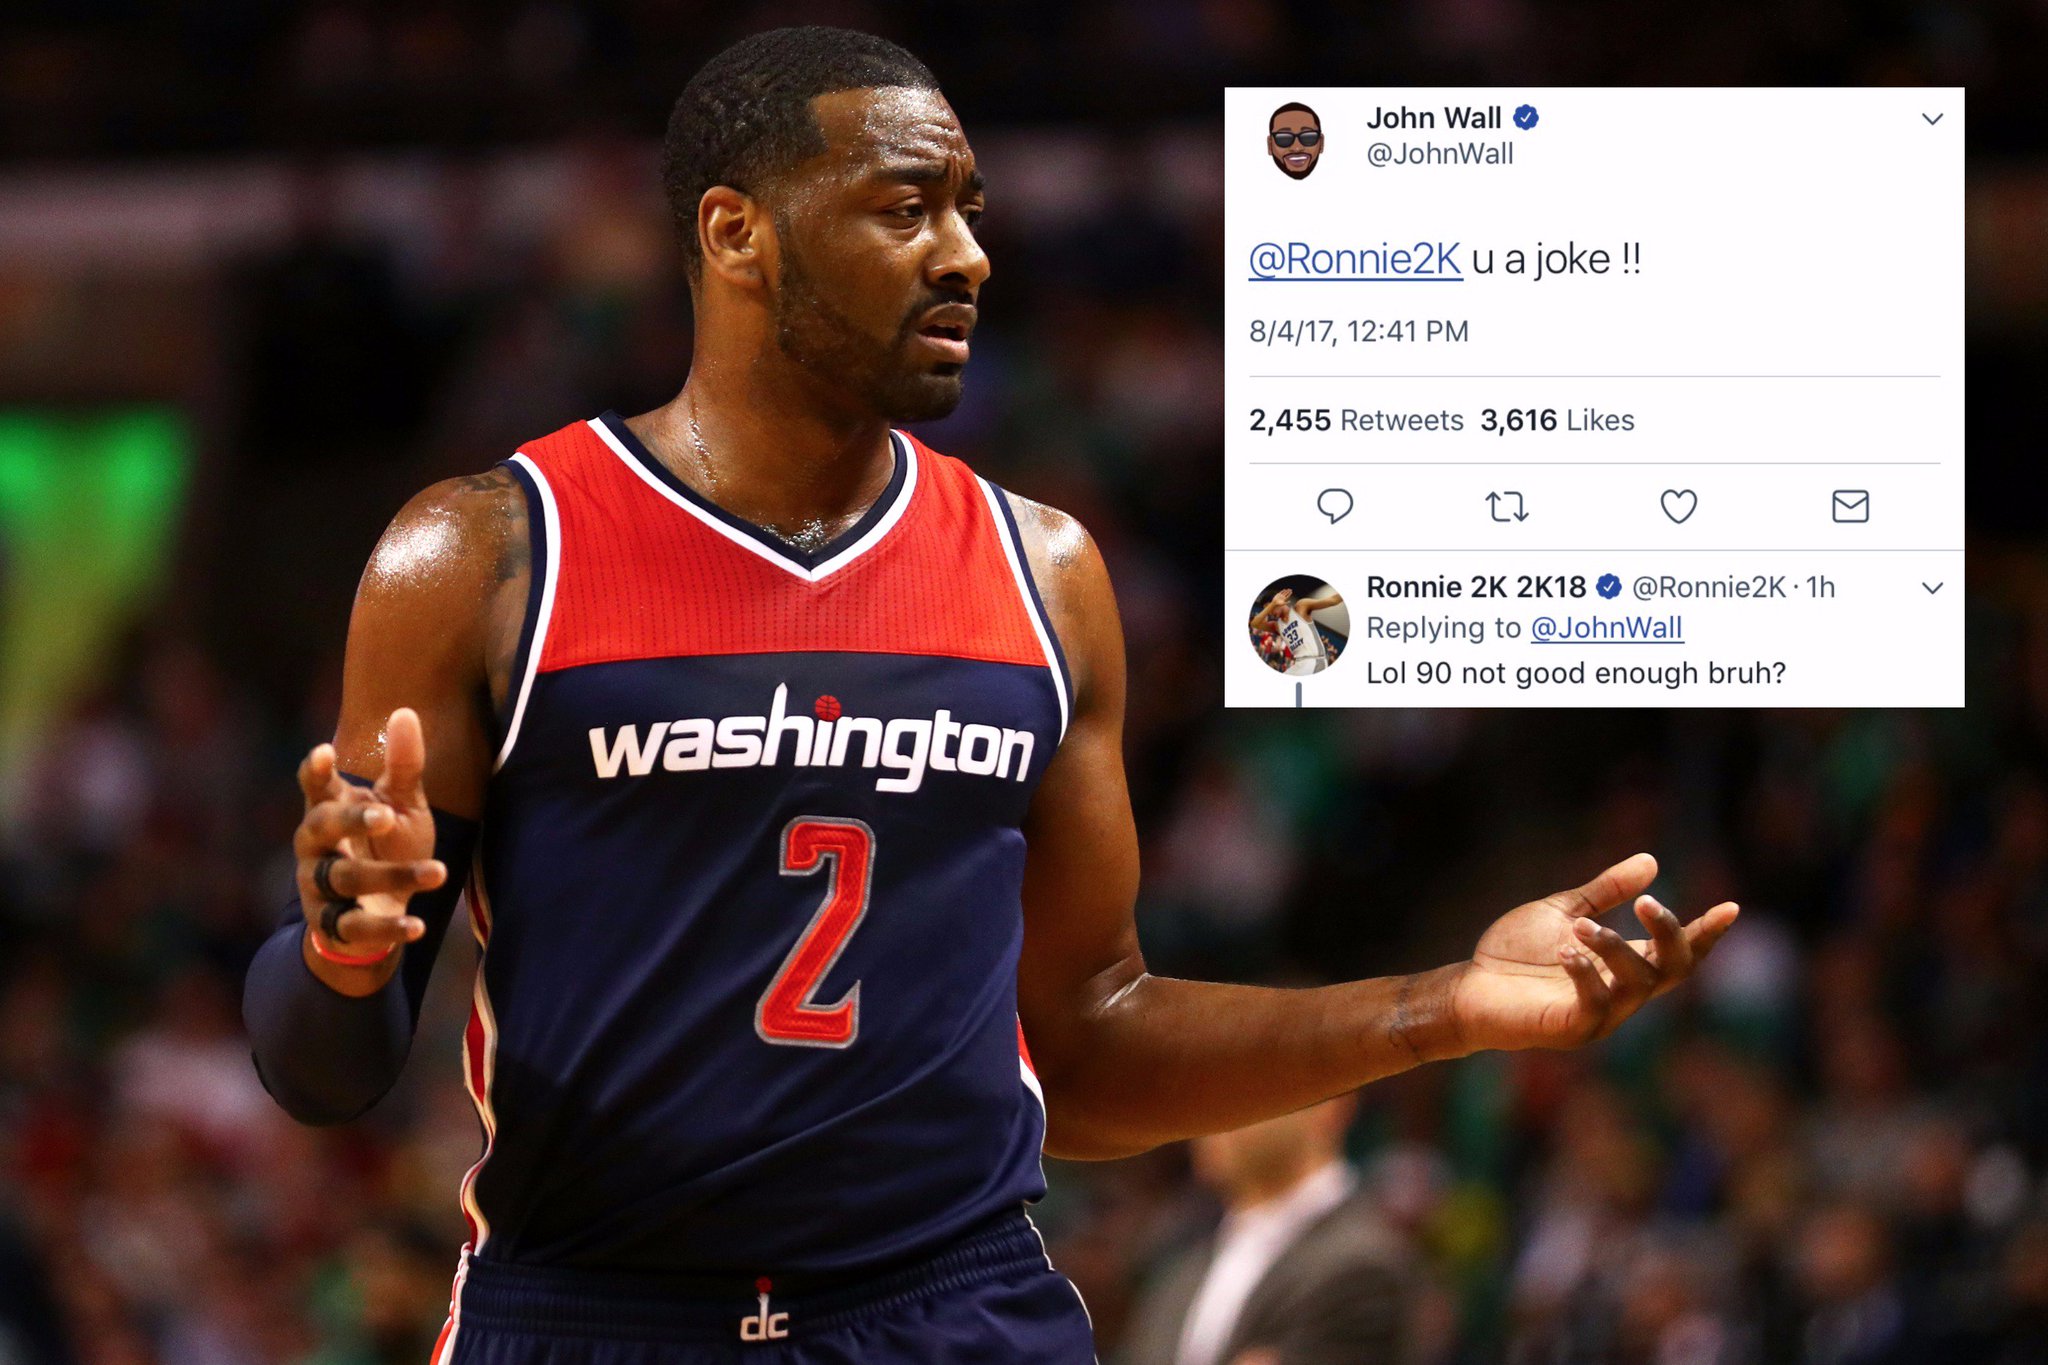 “John Wall doesn't seem too happy about his 2K rating 👀 https://t...